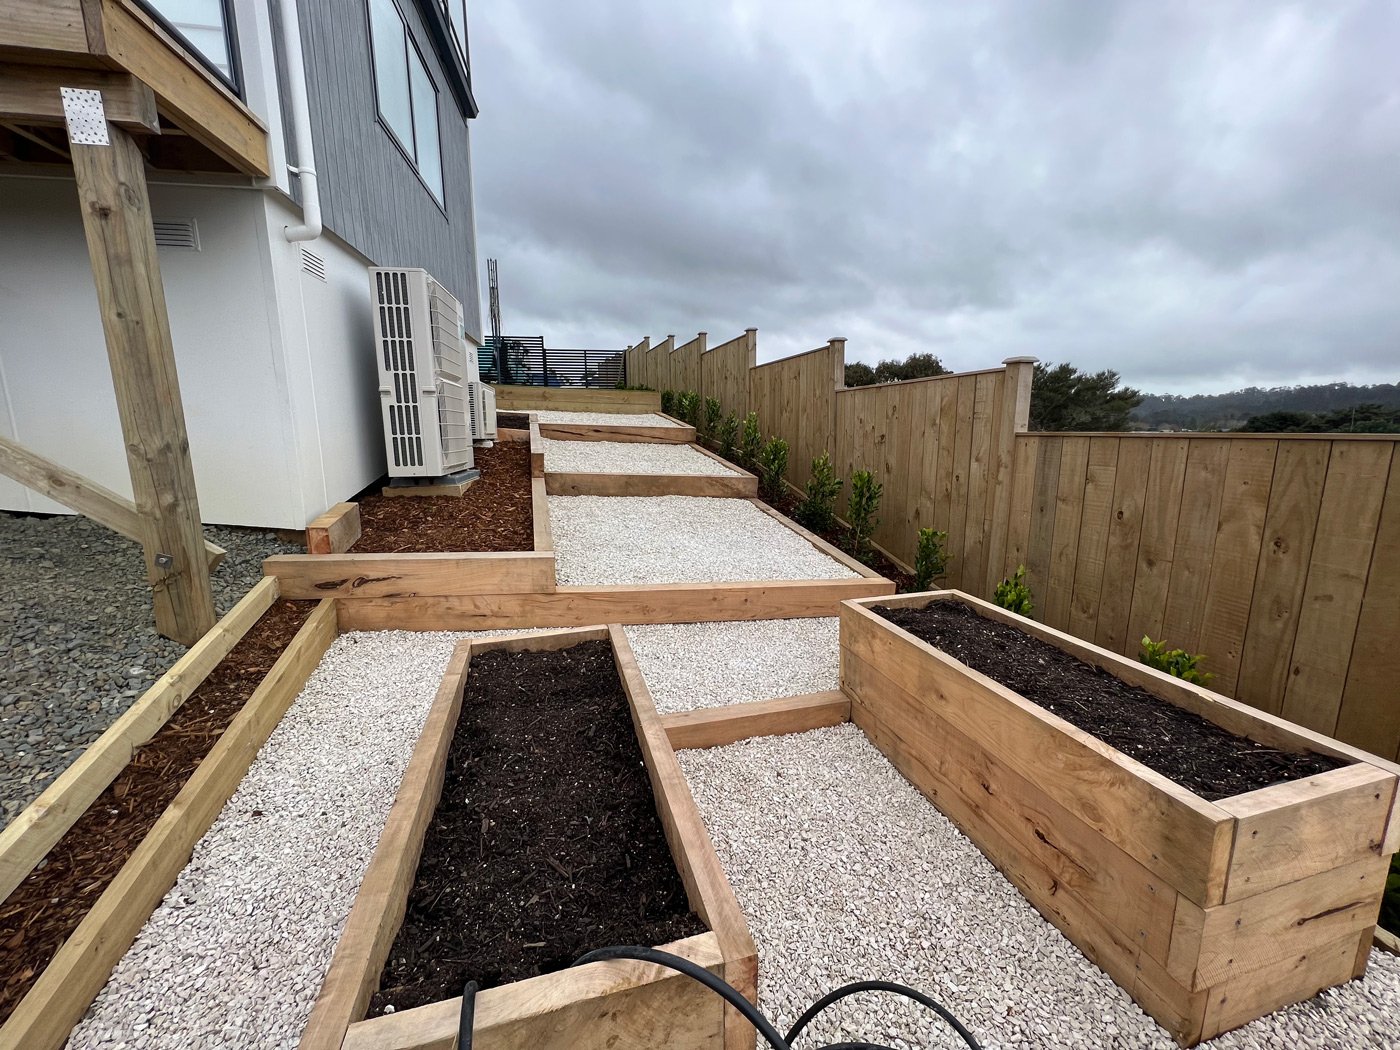 Large outside area going down the side of a newly built home with a couple vegetable beds and a row of freshly planted trees along the fence line